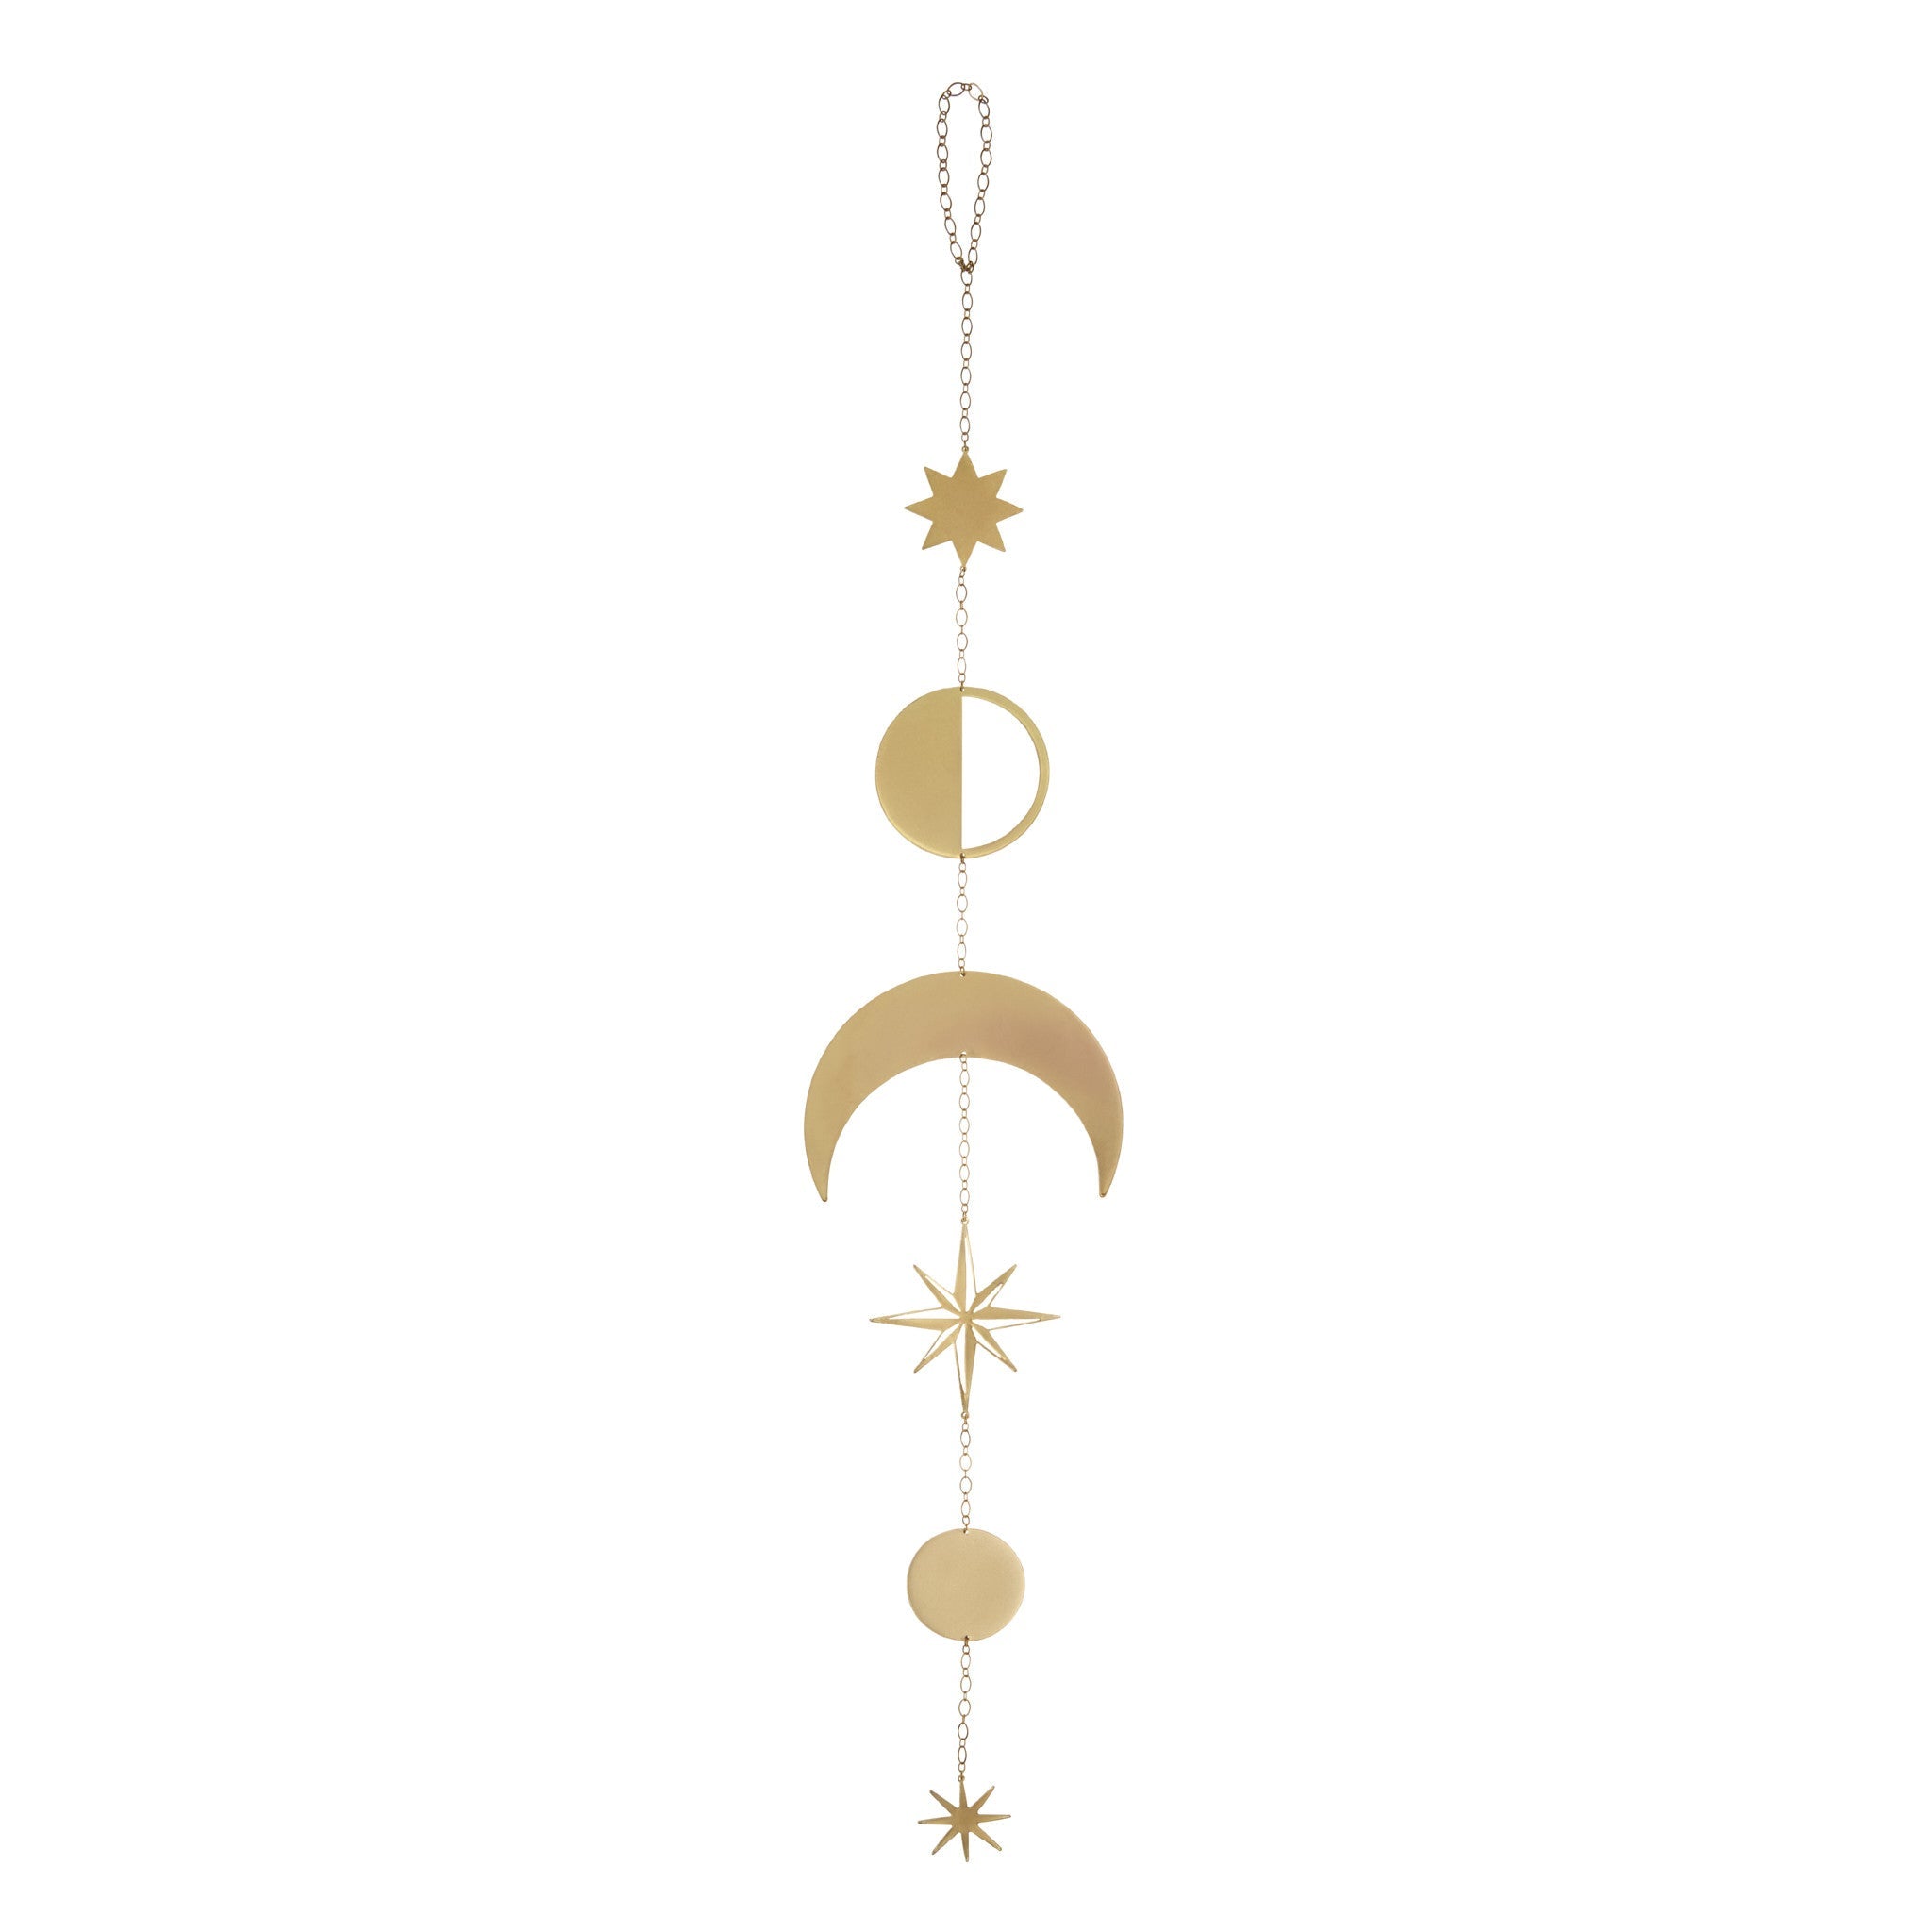 Ariana Ost's Lunar North Star Chime - handcrafted serenity for your home! Gold, silver, rose gold options. Wind chimes, celestial decor, boho, meditation, unique gift. Shop now!